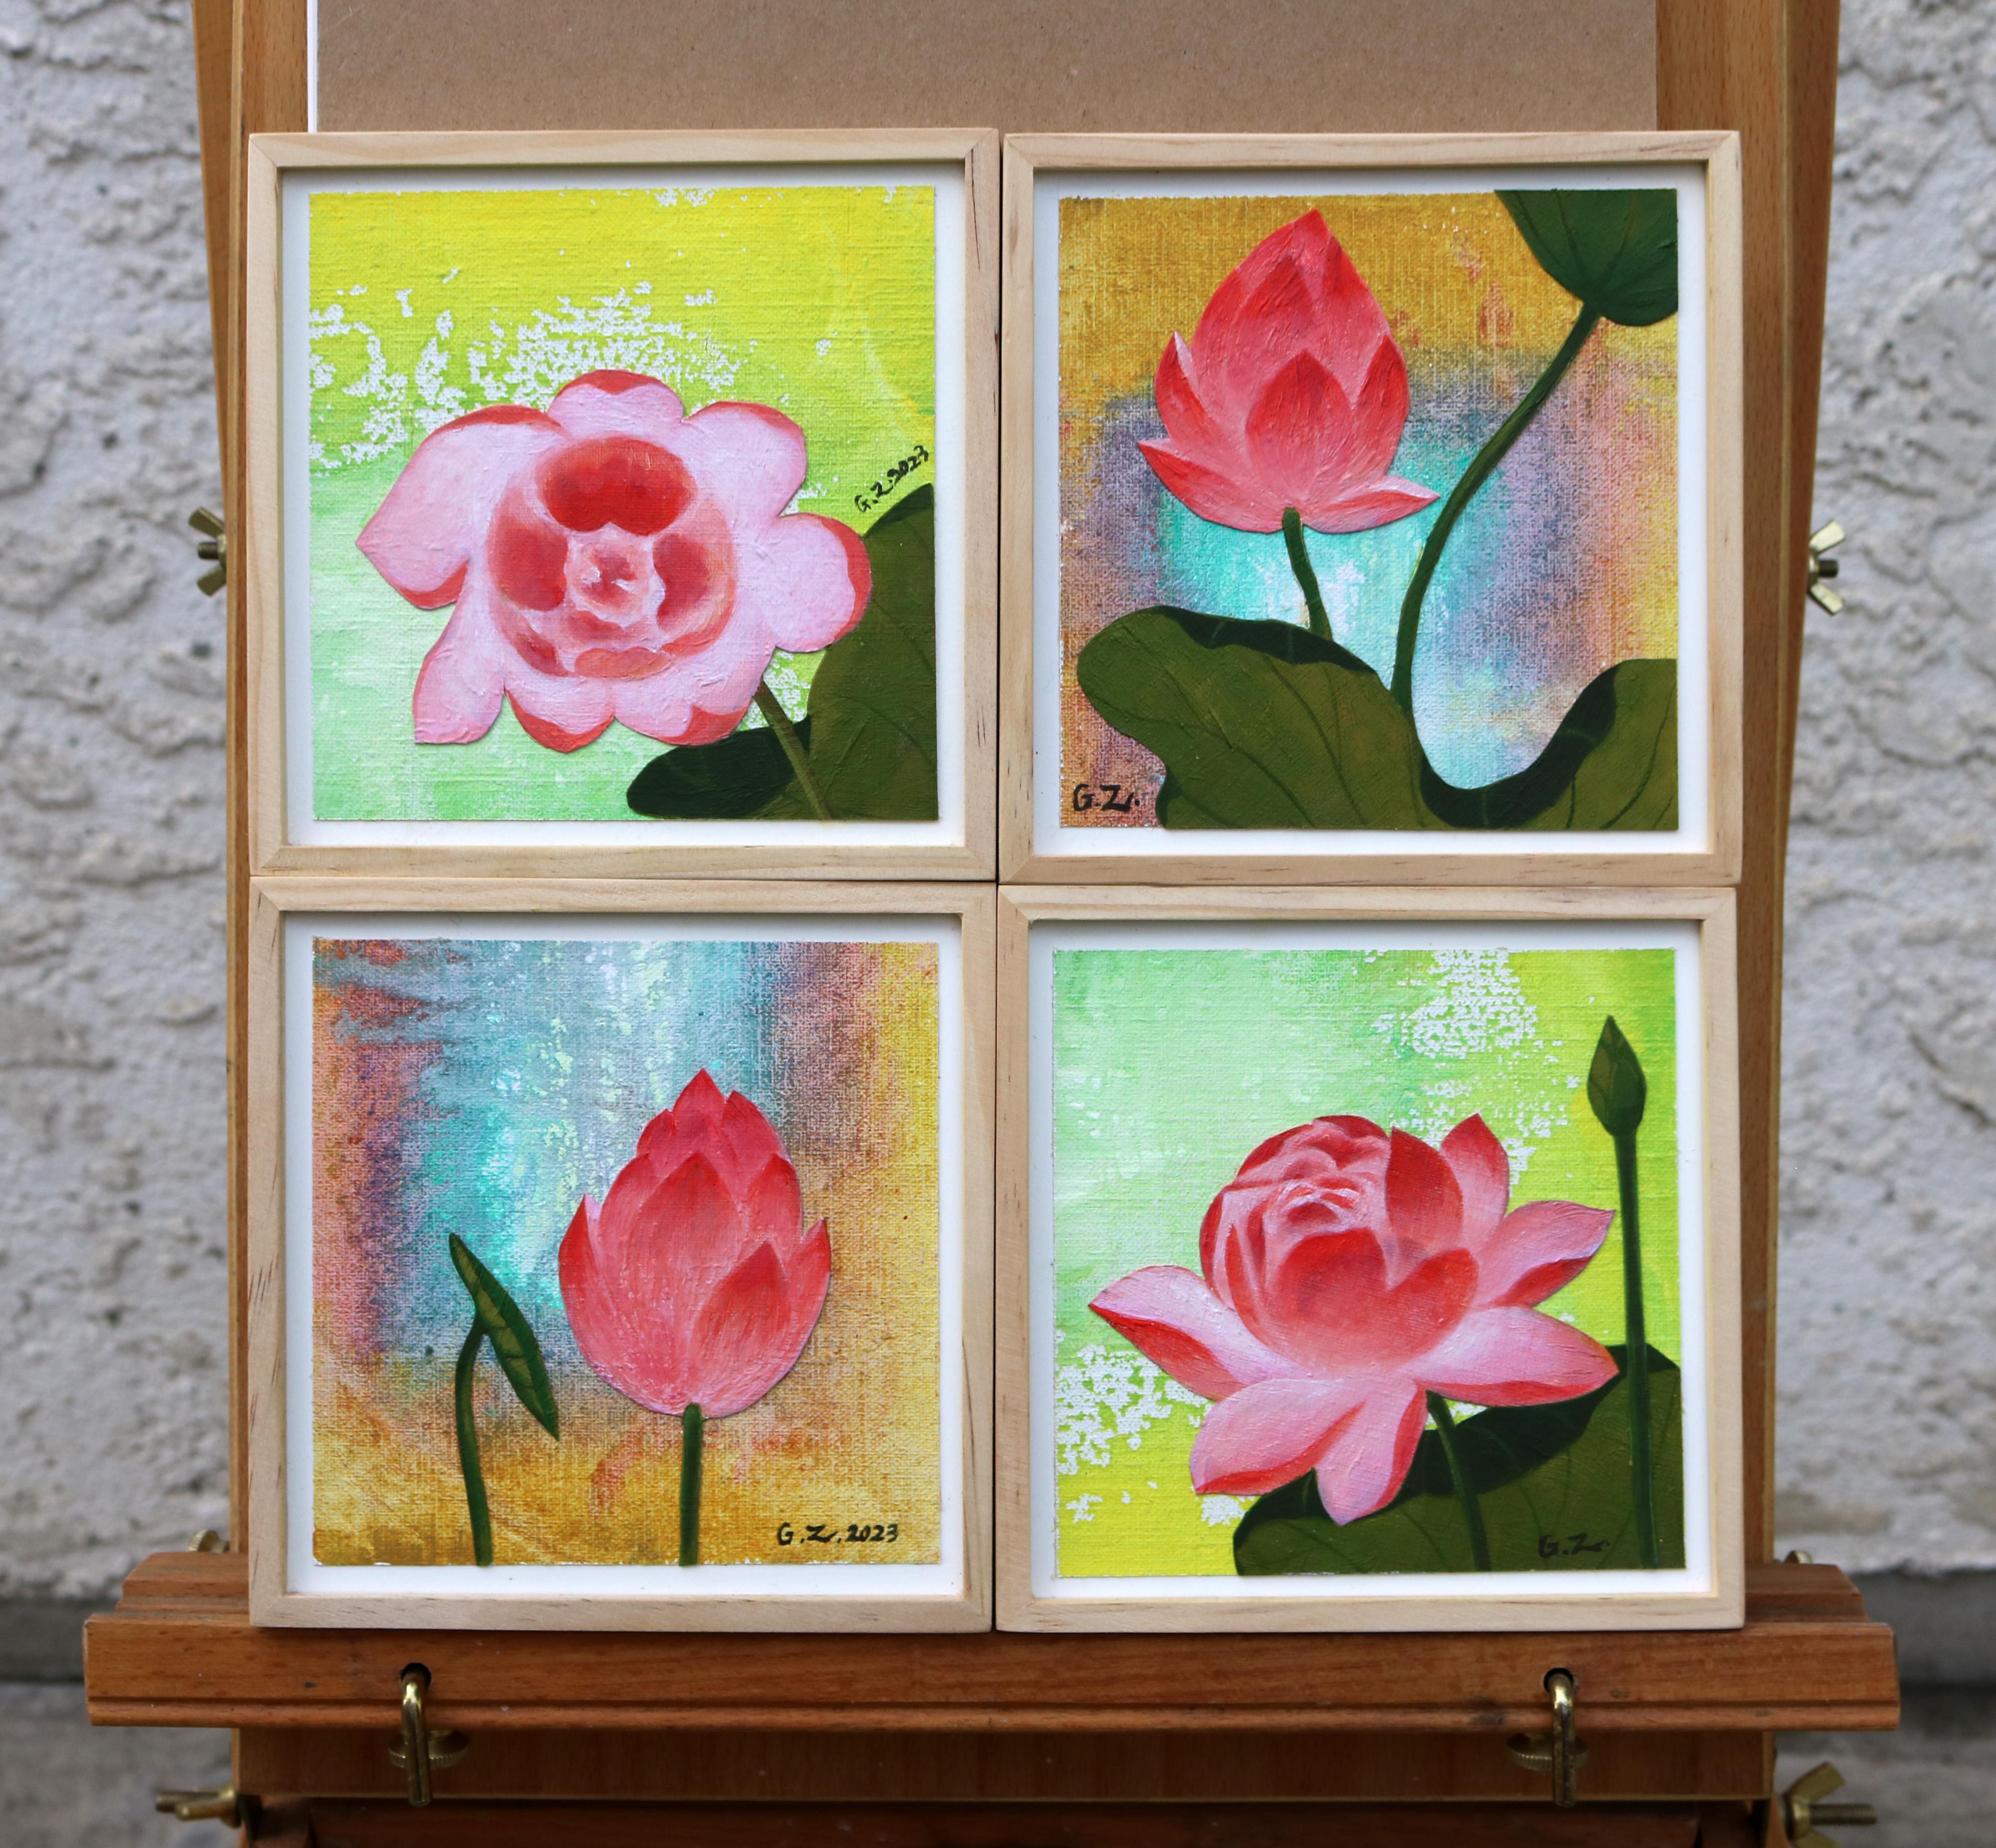 <p>Artist Comments<br>Artist Guigen Zha presents a quadriptych of pink lotuses in varying positions and stages of growth. He creates an eye-catching contrast by realistically painting the flowers over the abstract gradient background. Guigen